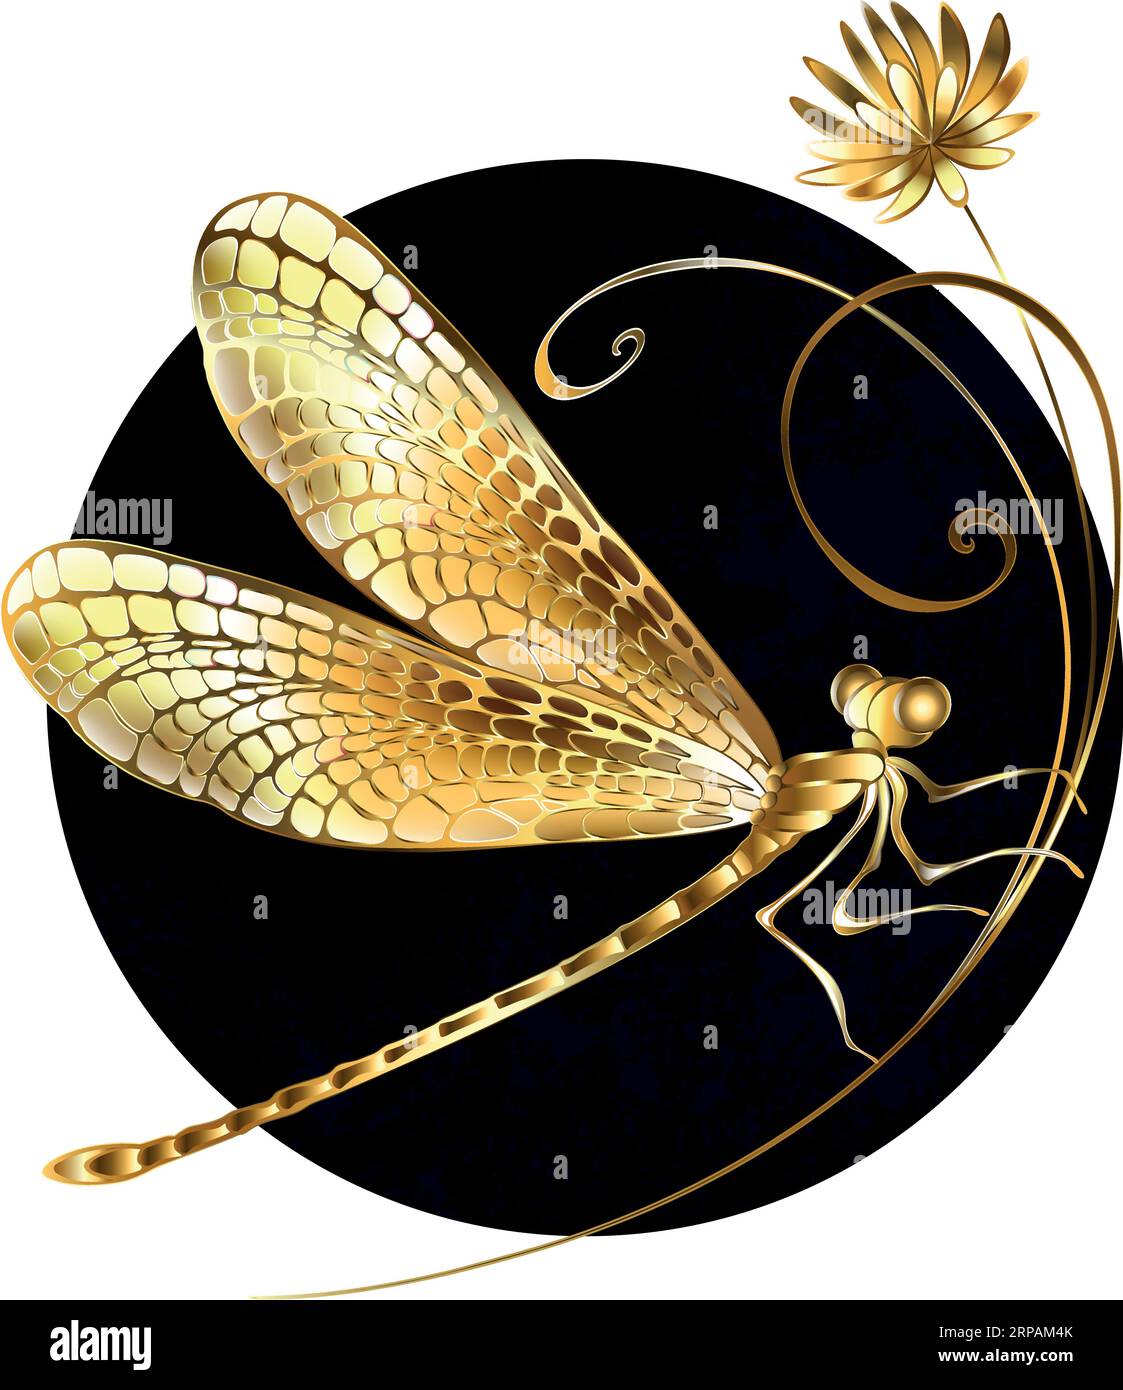 Artistically painted, gold, jewelry, sparkling dragonfly with detailed, filigree wings on golden wild flower, against black textured circle. Golden dr Stock Vector